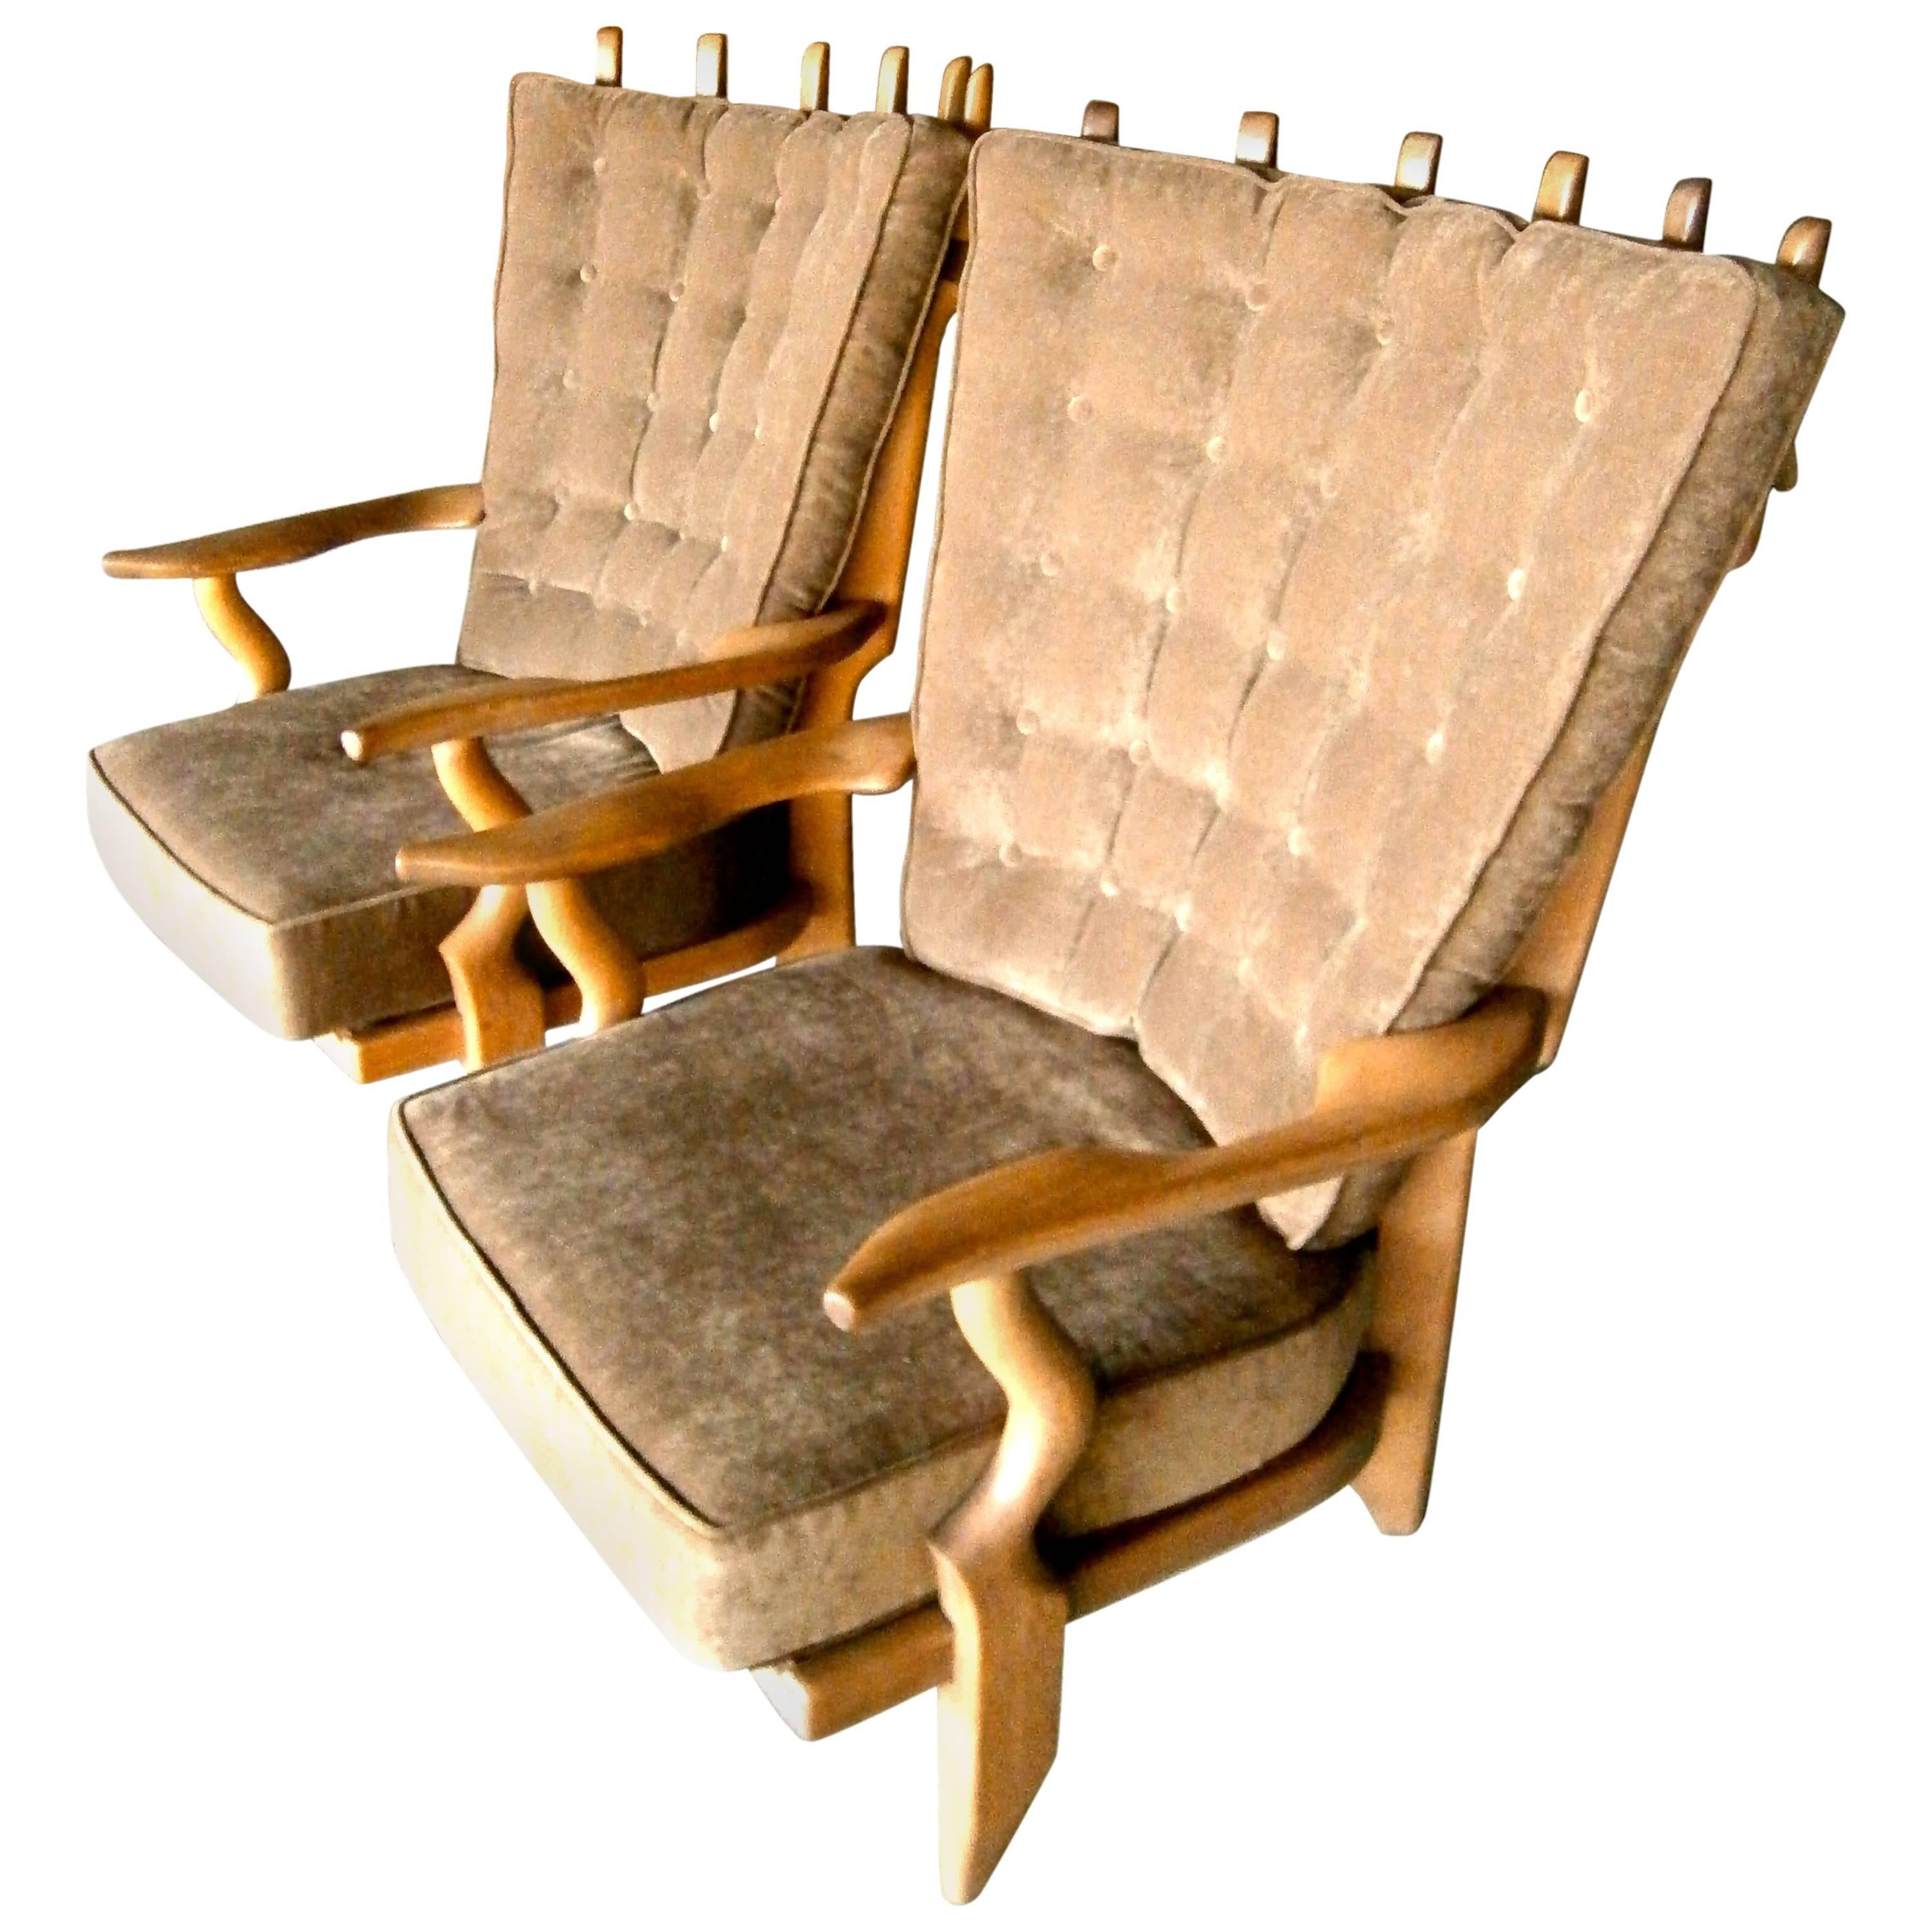 Dynamic Pair of Oak "Grand Repos" Chairs by Guillerme et Chambron C. 1960